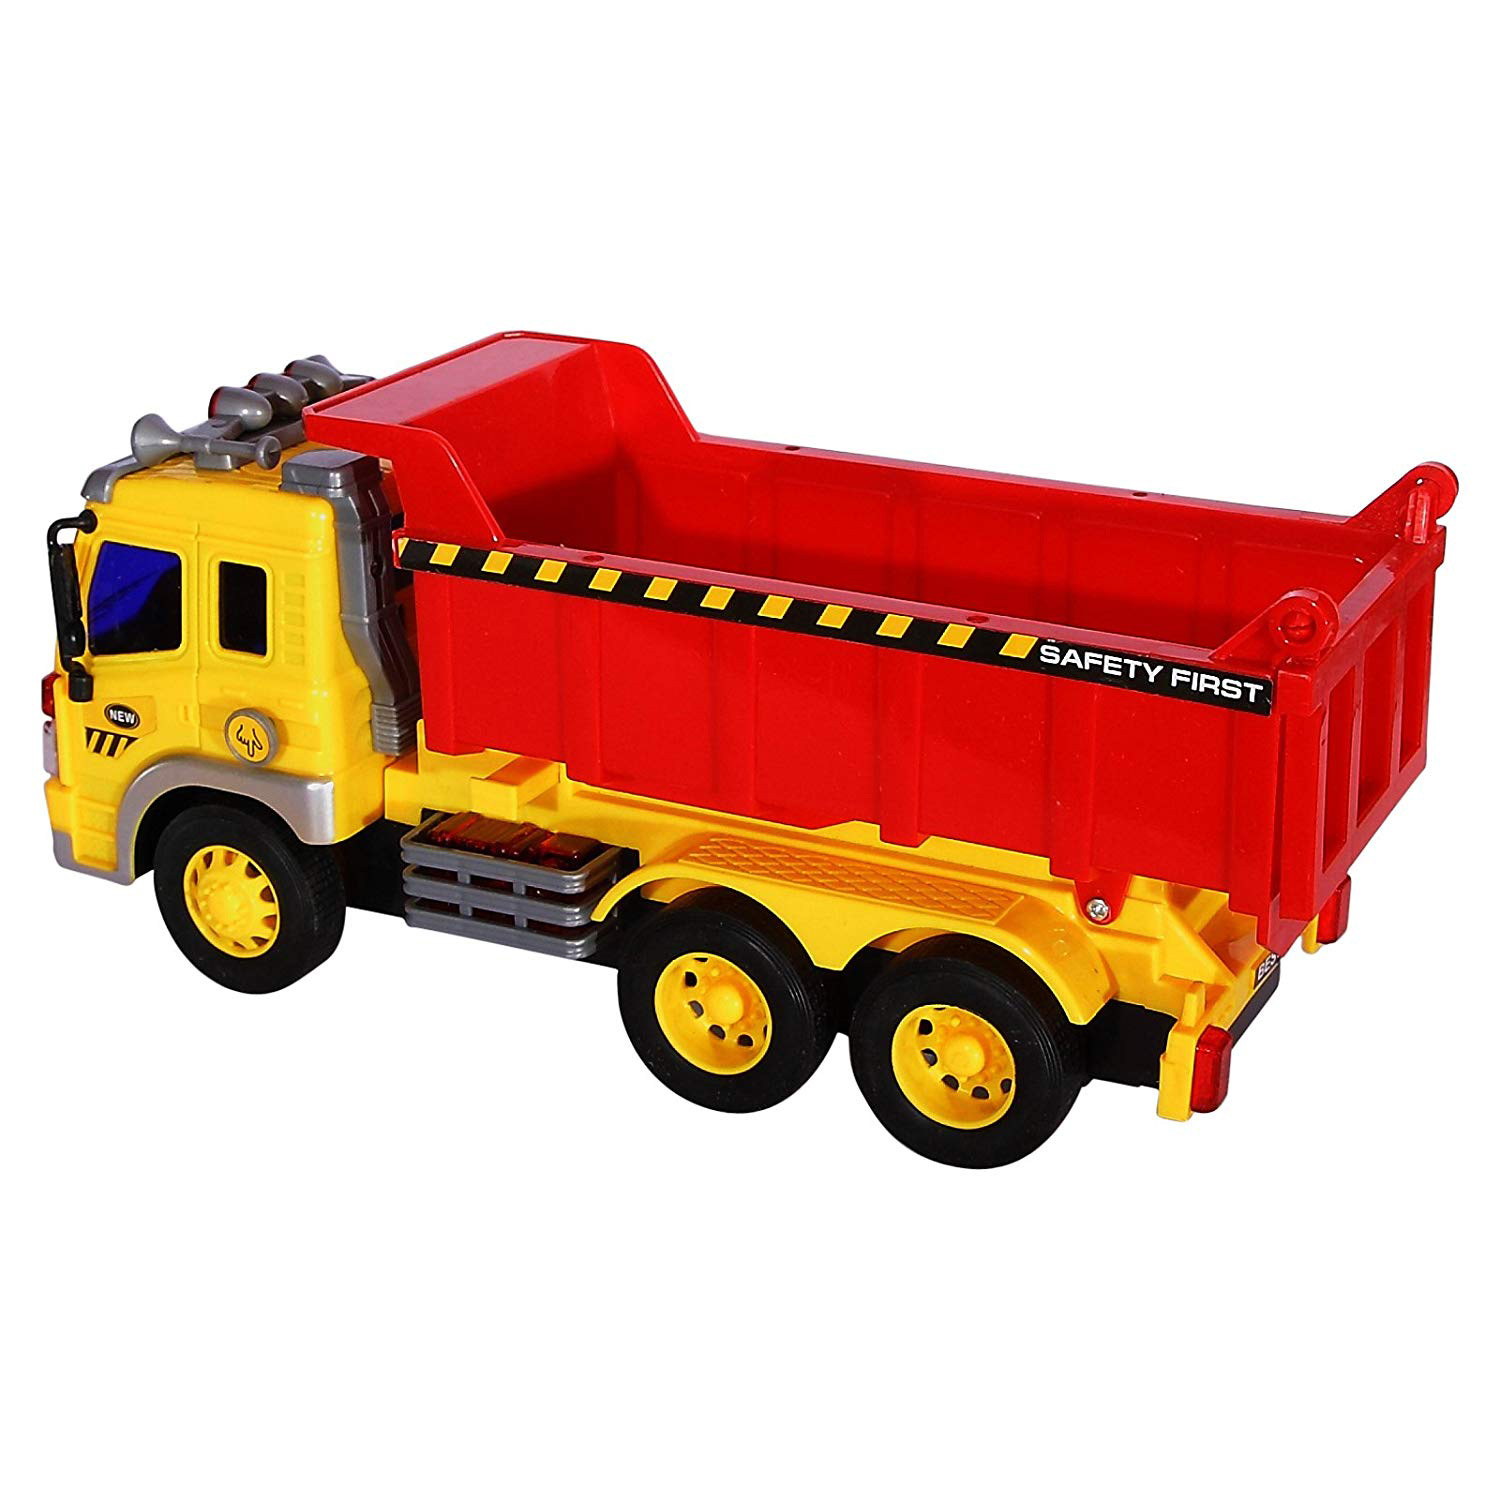 Battery Included Friction Powered Dump Truck Toy with Lights and Sound for Kids Construction Toy by Vokodo 